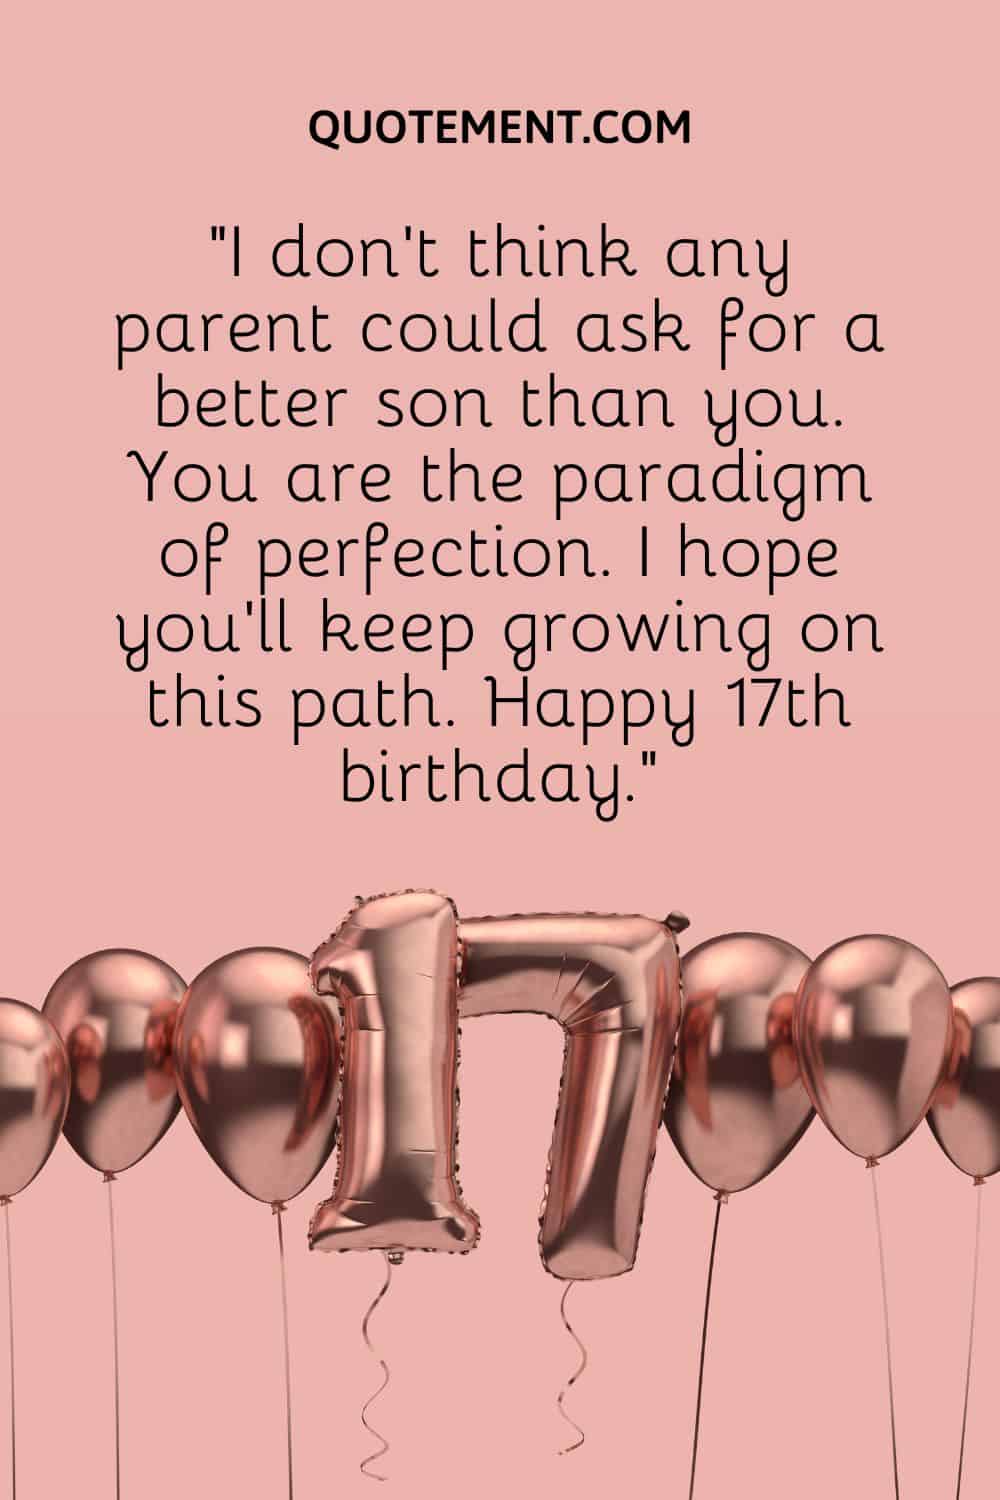 “I don’t think any parent could ask for a better son than you. You are the paradigm of perfection. I hope you’ll keep growing on this path. Happy 17th birthday.”